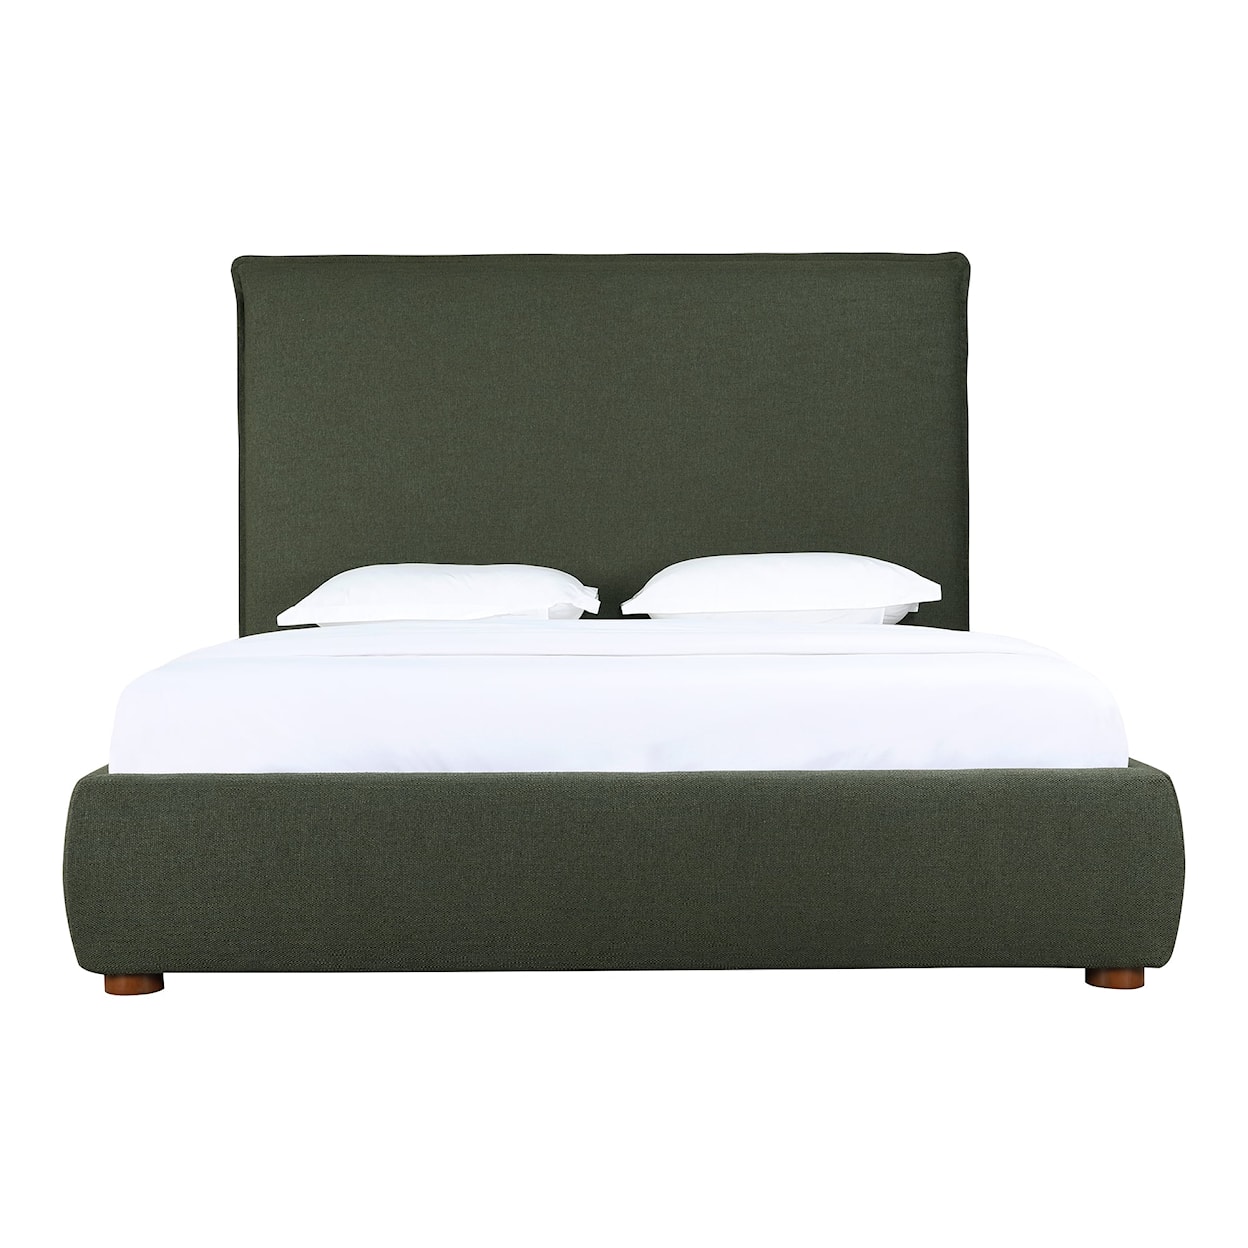 Moe's Home Collection Luzon Upholstered Tall Queen Bed